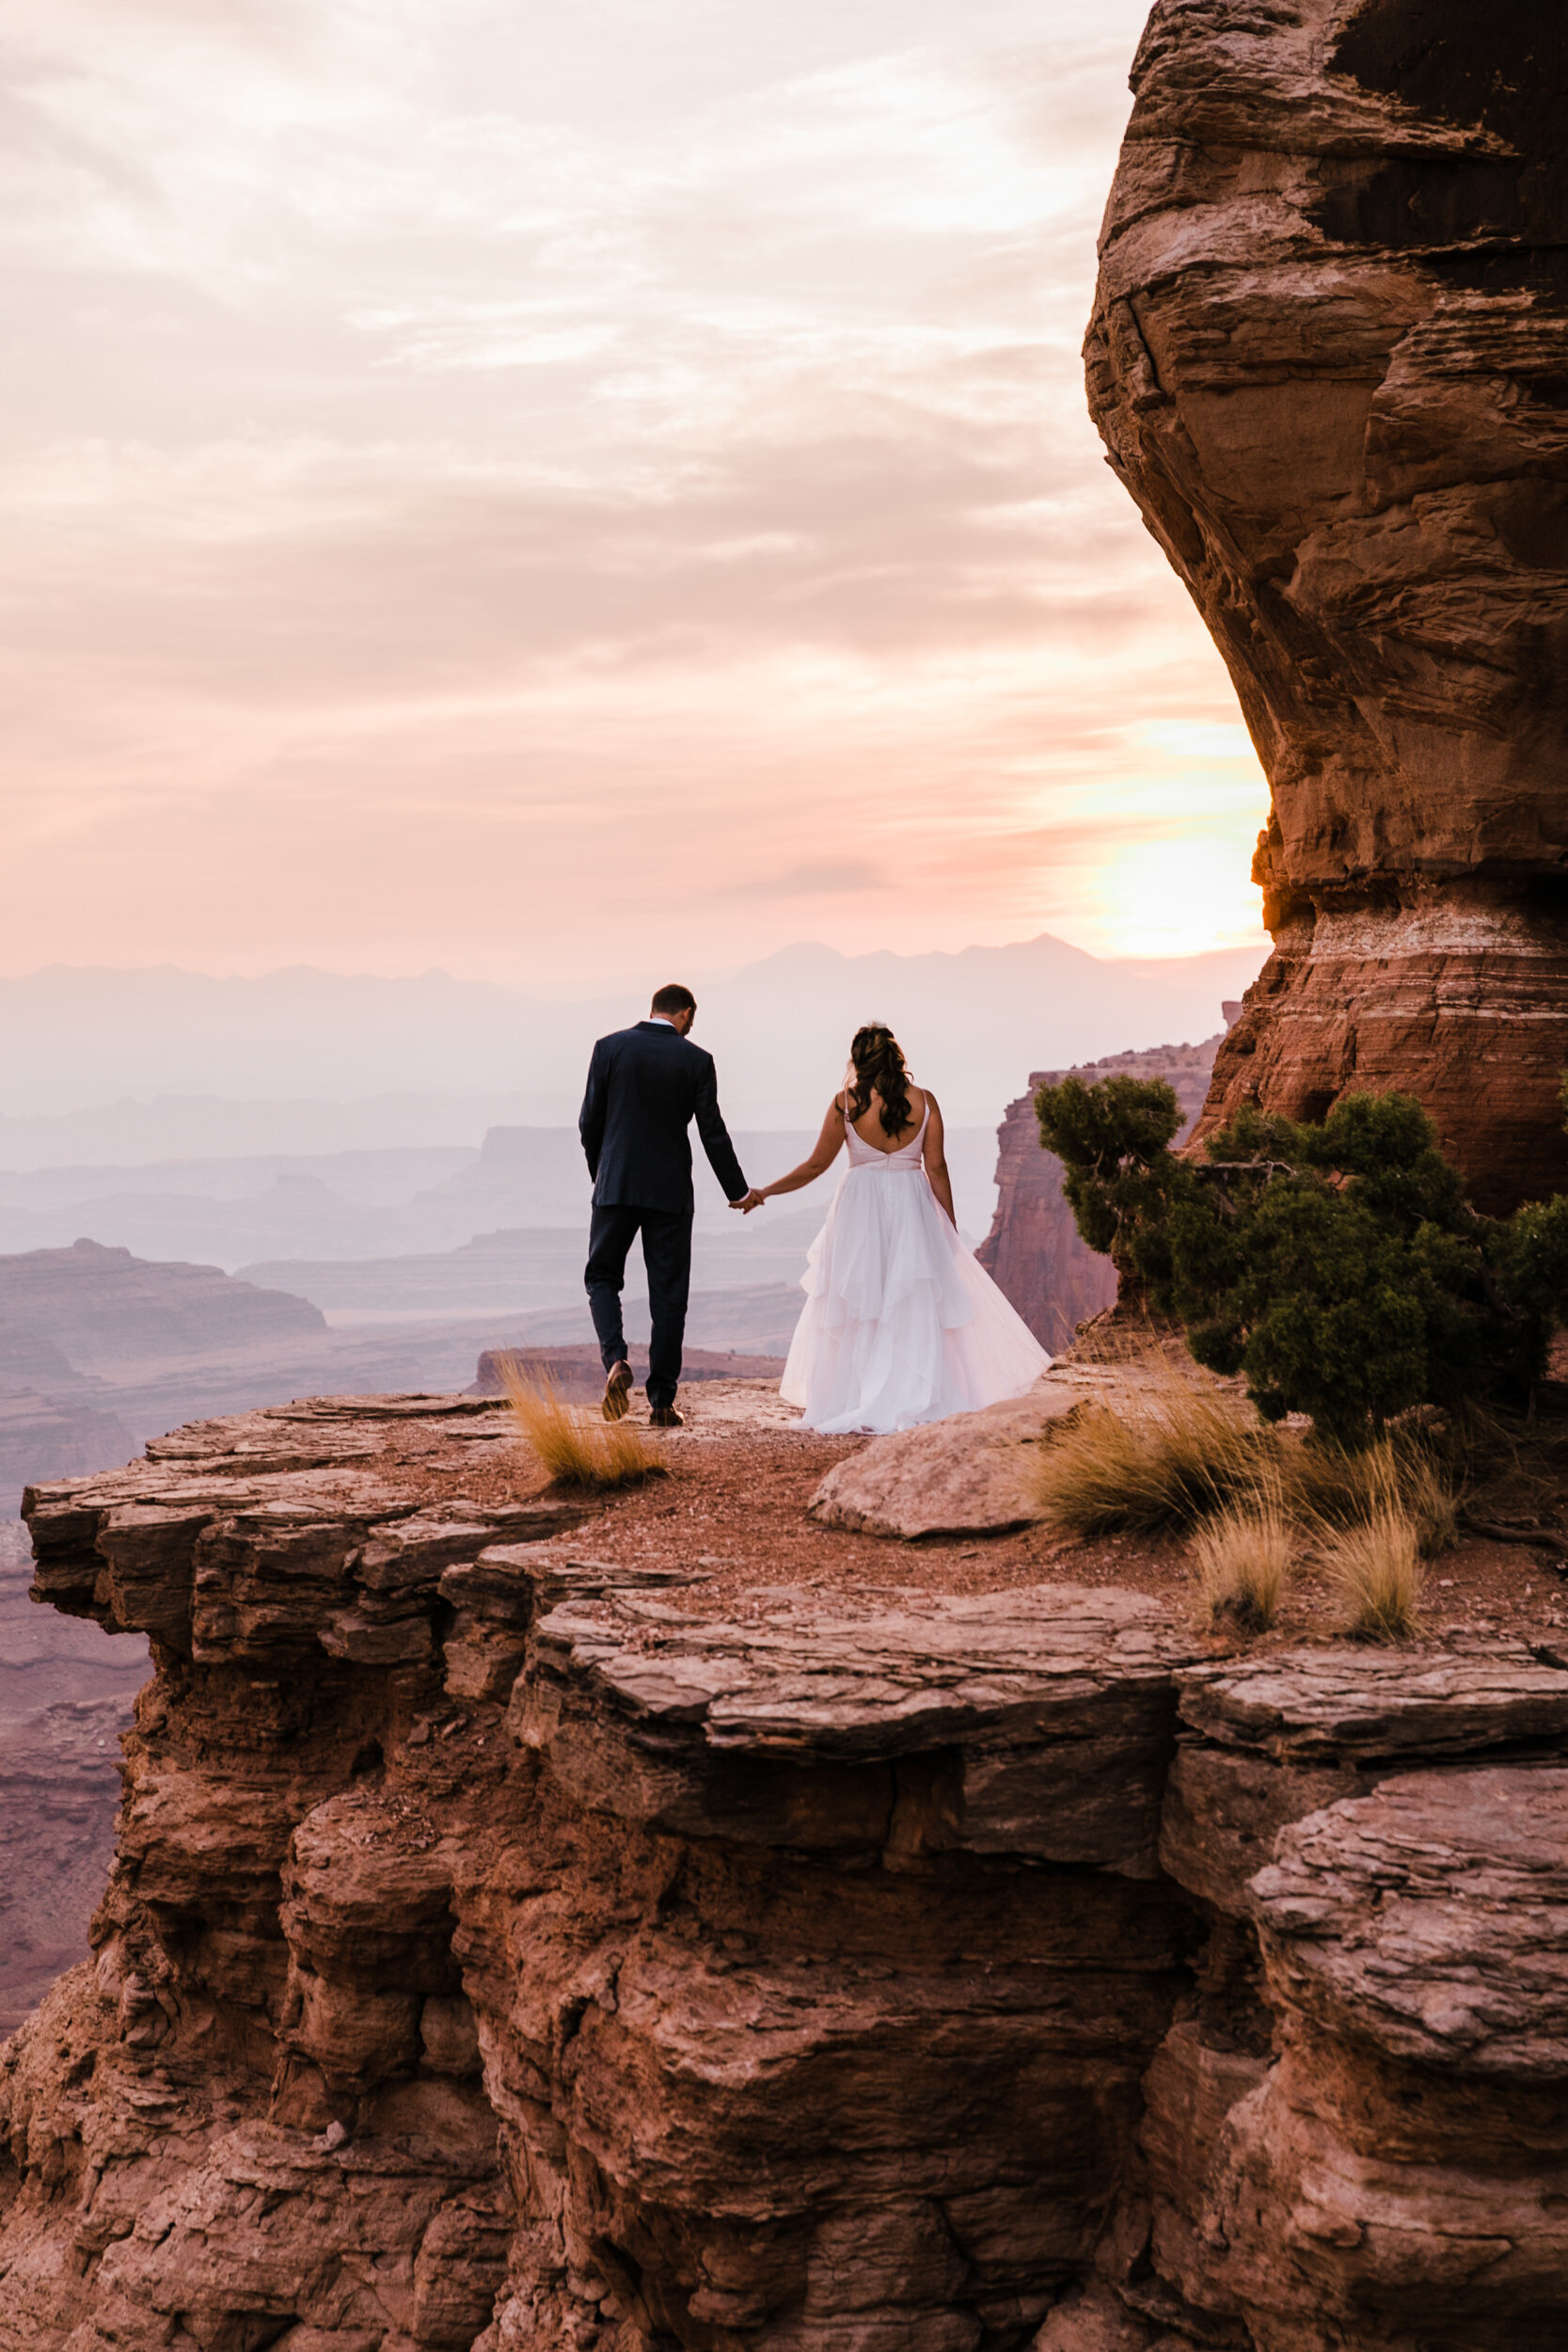 Sunrise wedding in the Moab desert with The Hearnes